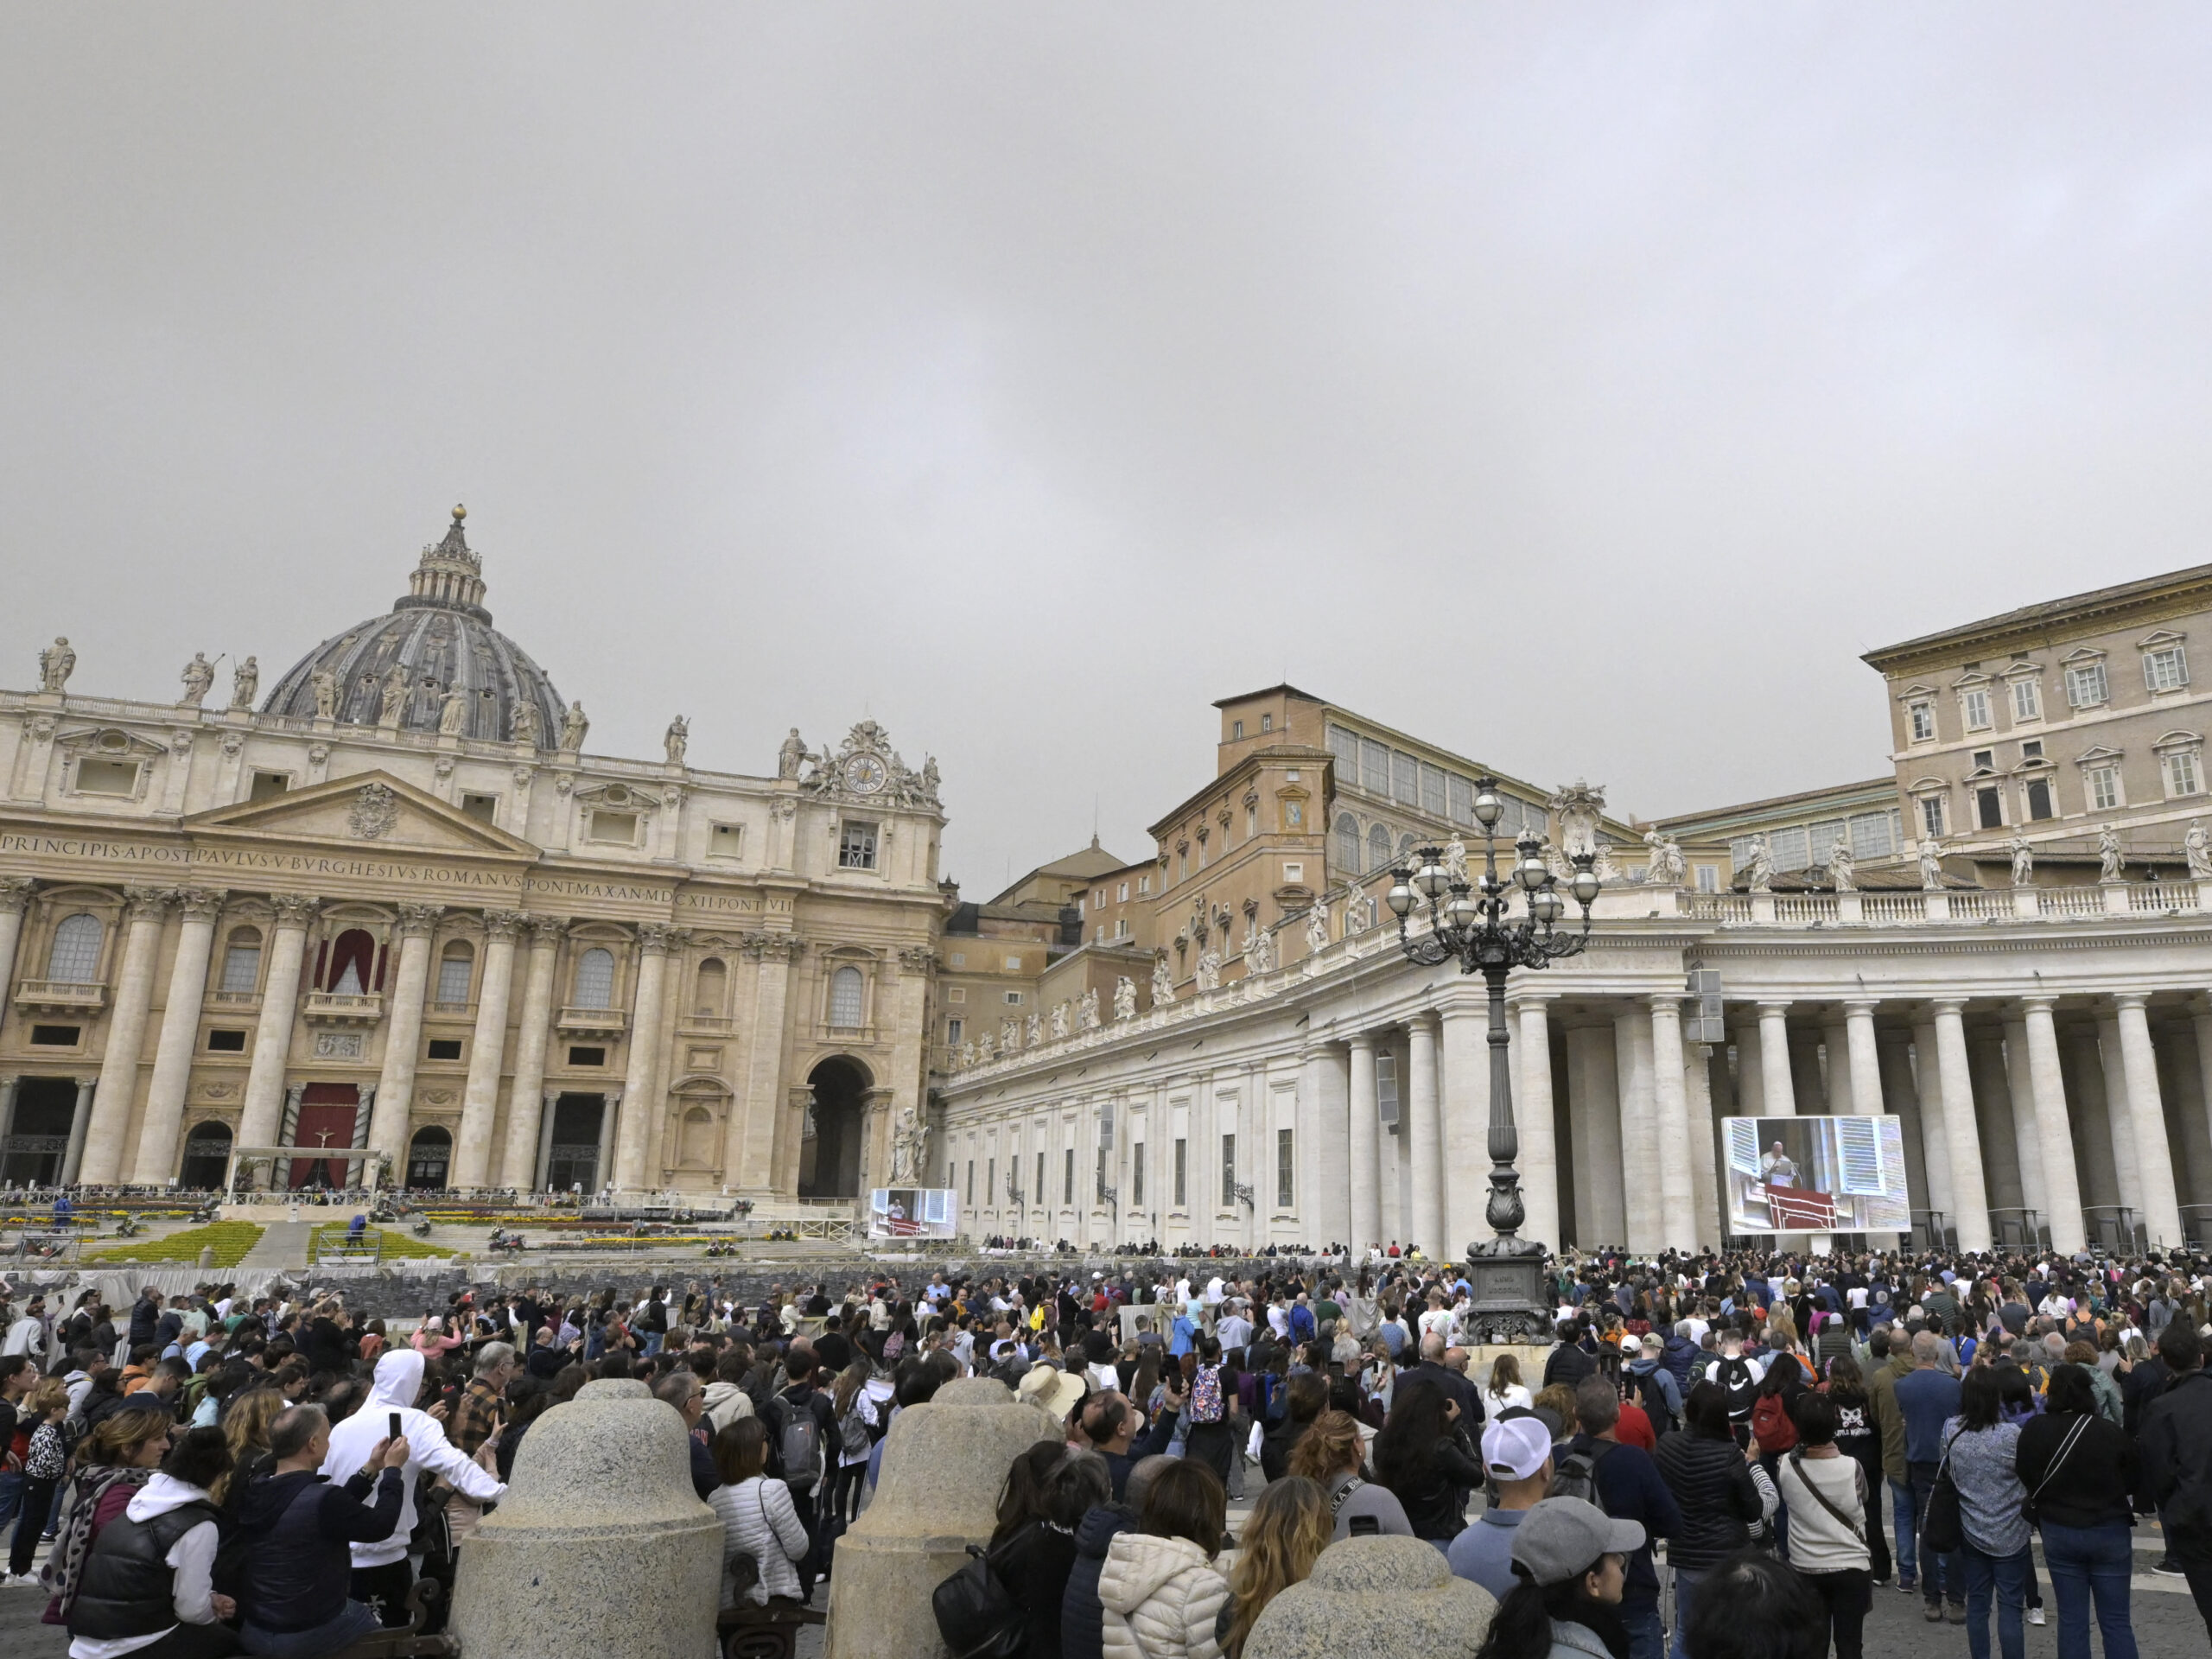 The Vatican says surrogacy and gender theory are ‘grave threats’ to human dignity